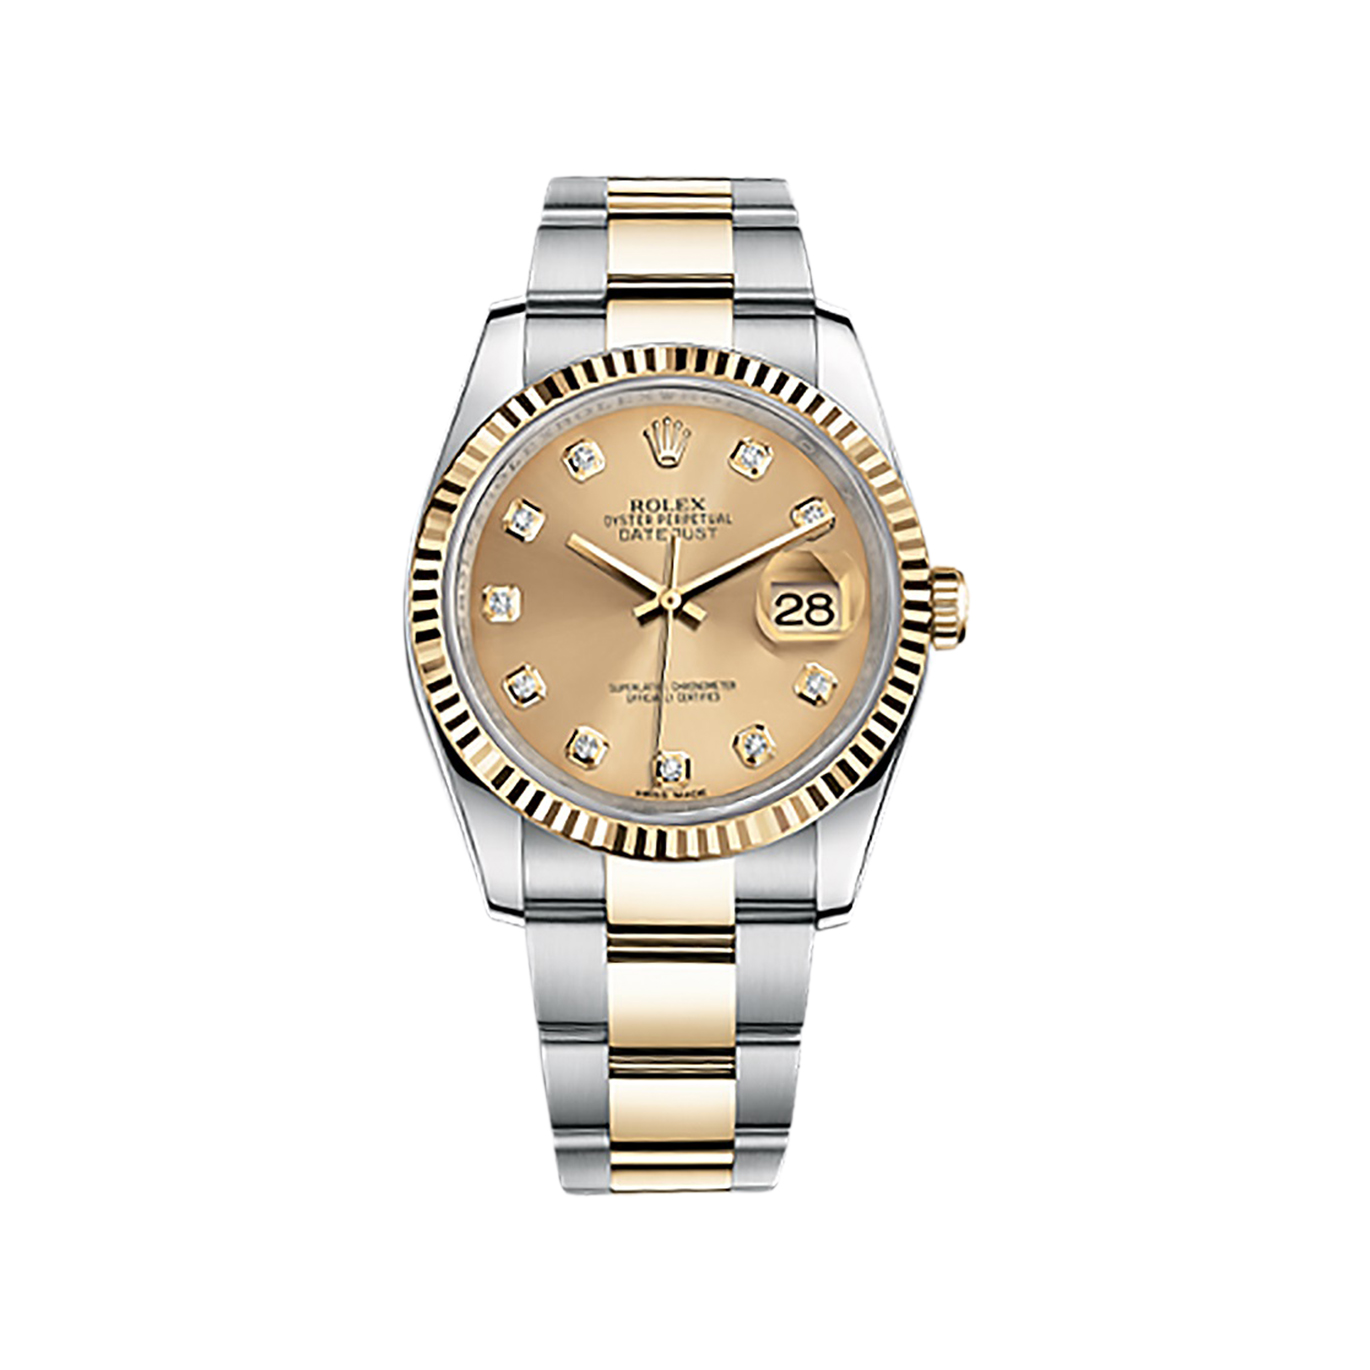 Datejust 36 116233 Gold & Stainless Steel Watch (Champagne Set with Diamonds)